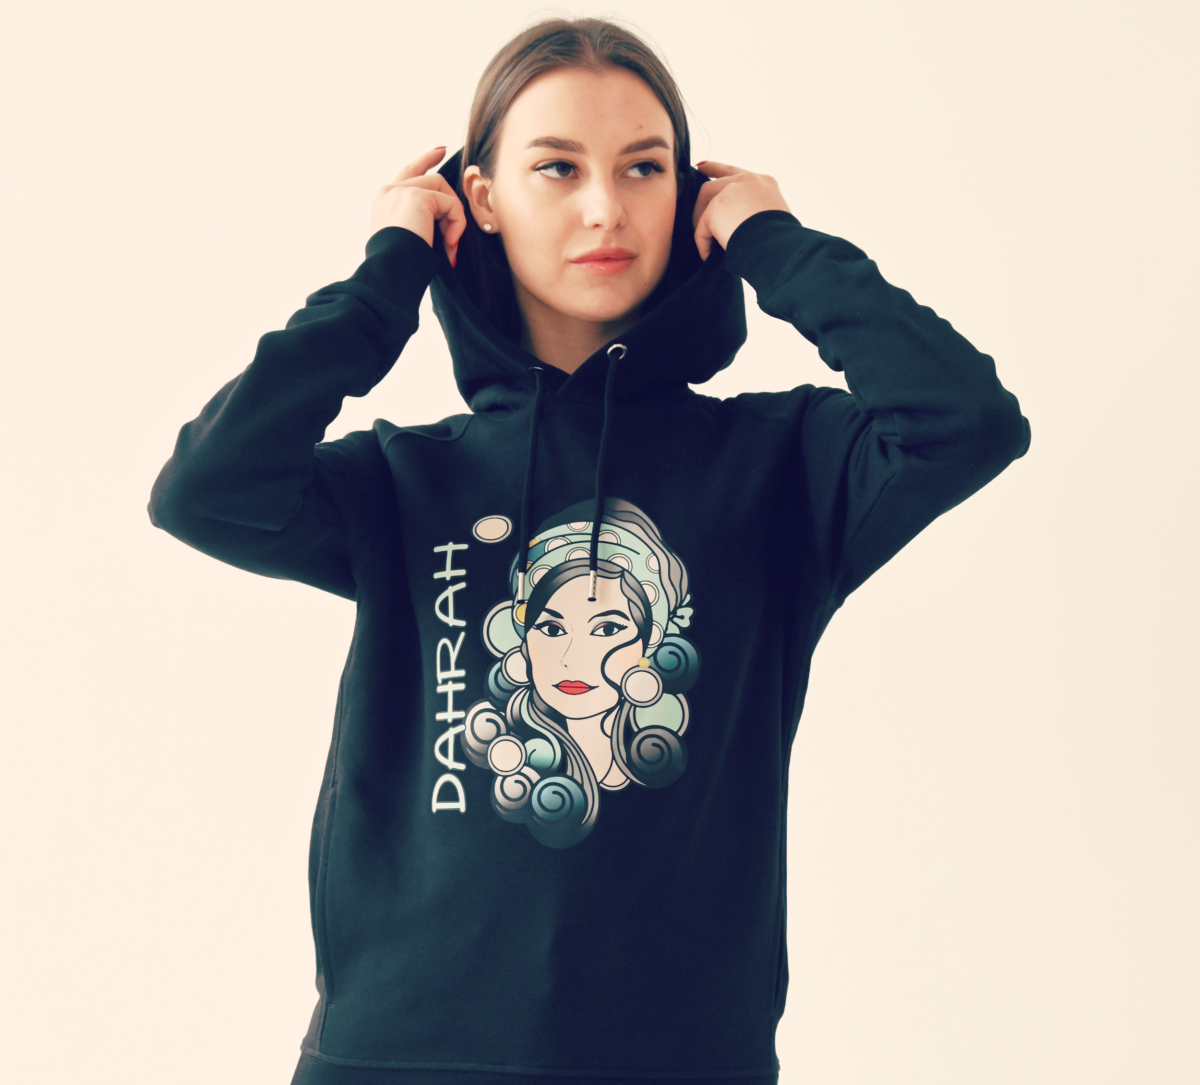 Beautiful high quality organic hoodie with print of a girl with black curls designed by Dahrah Darah Fashion.